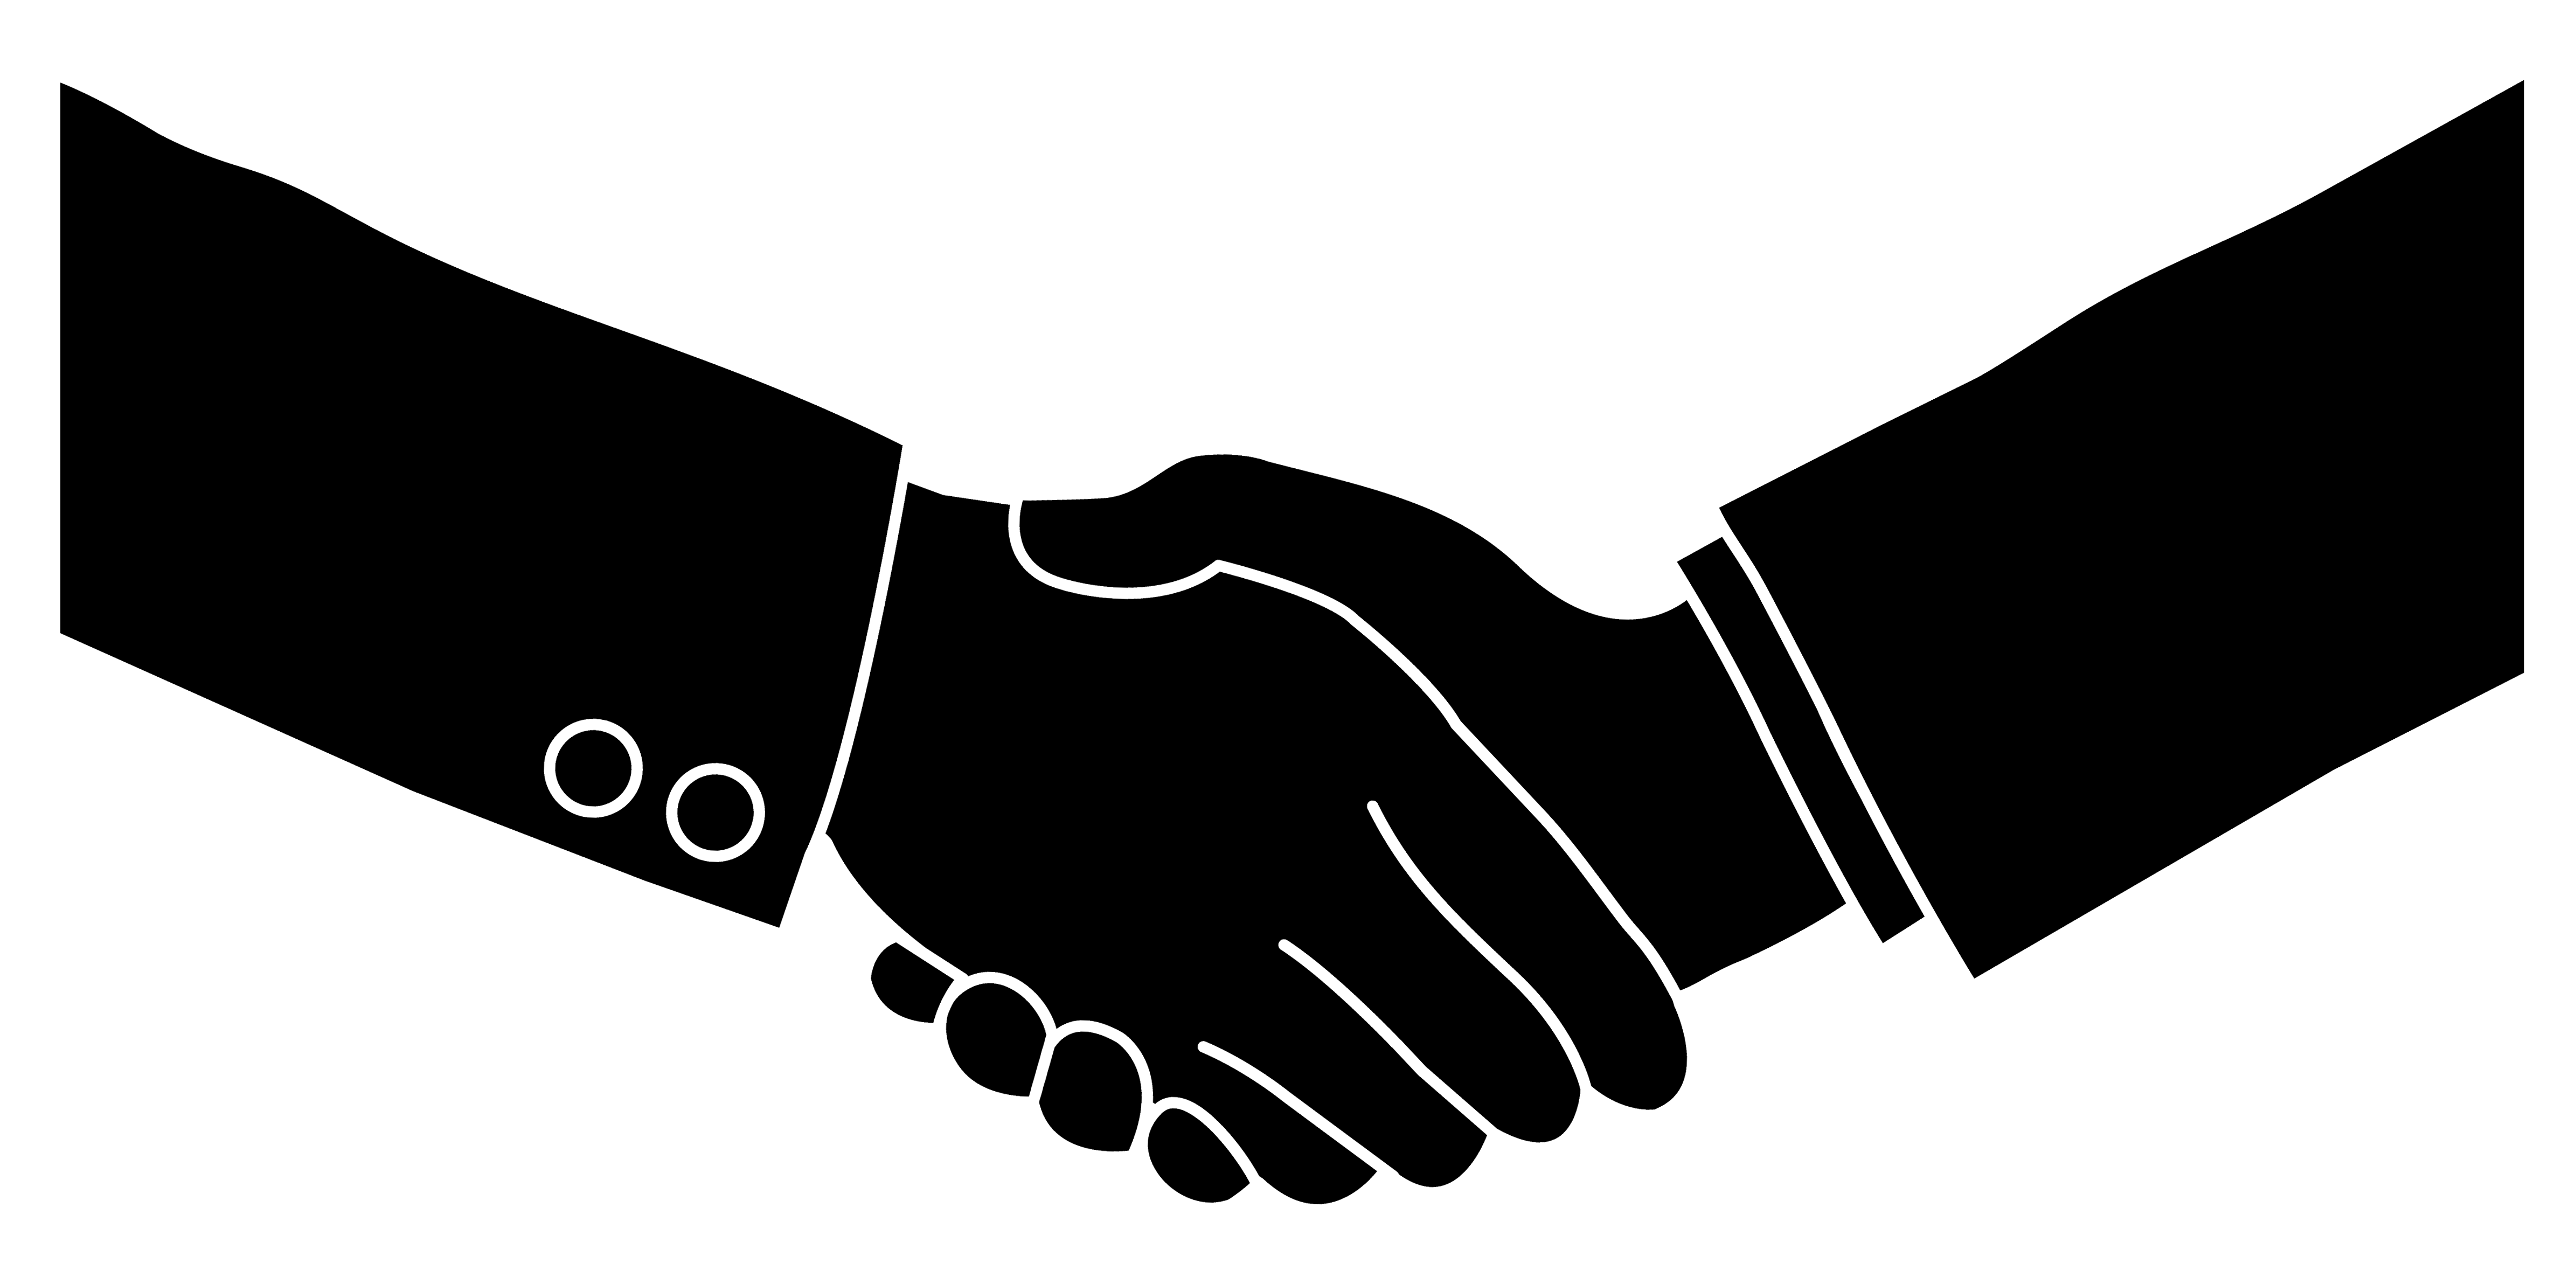 Shaking Hands Logo - Free Pics Of Hands Shaking, Download Free Clip Art, Free Clip Art